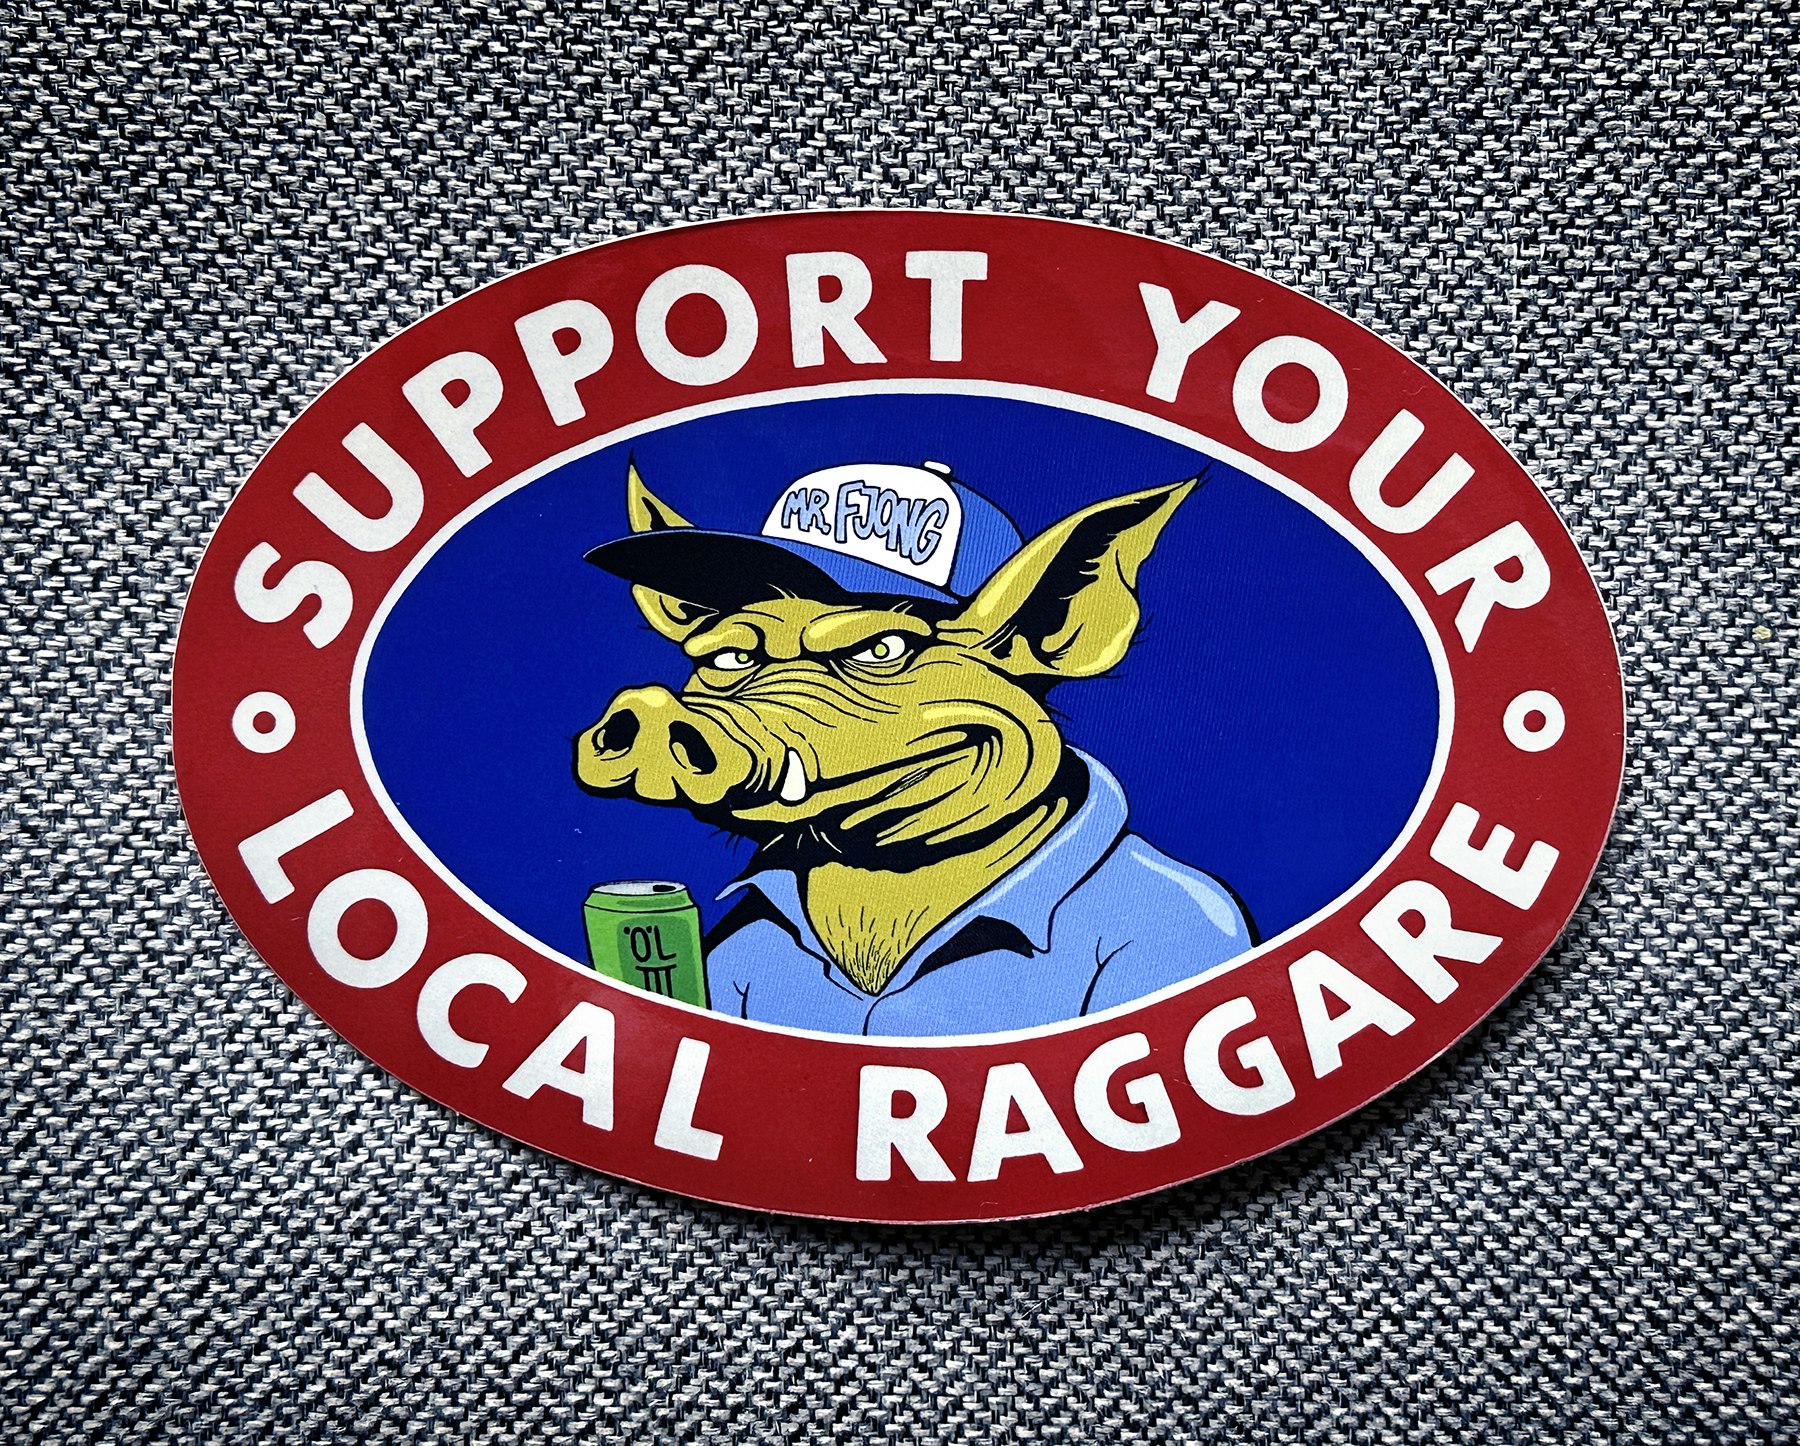 Support your local raggare